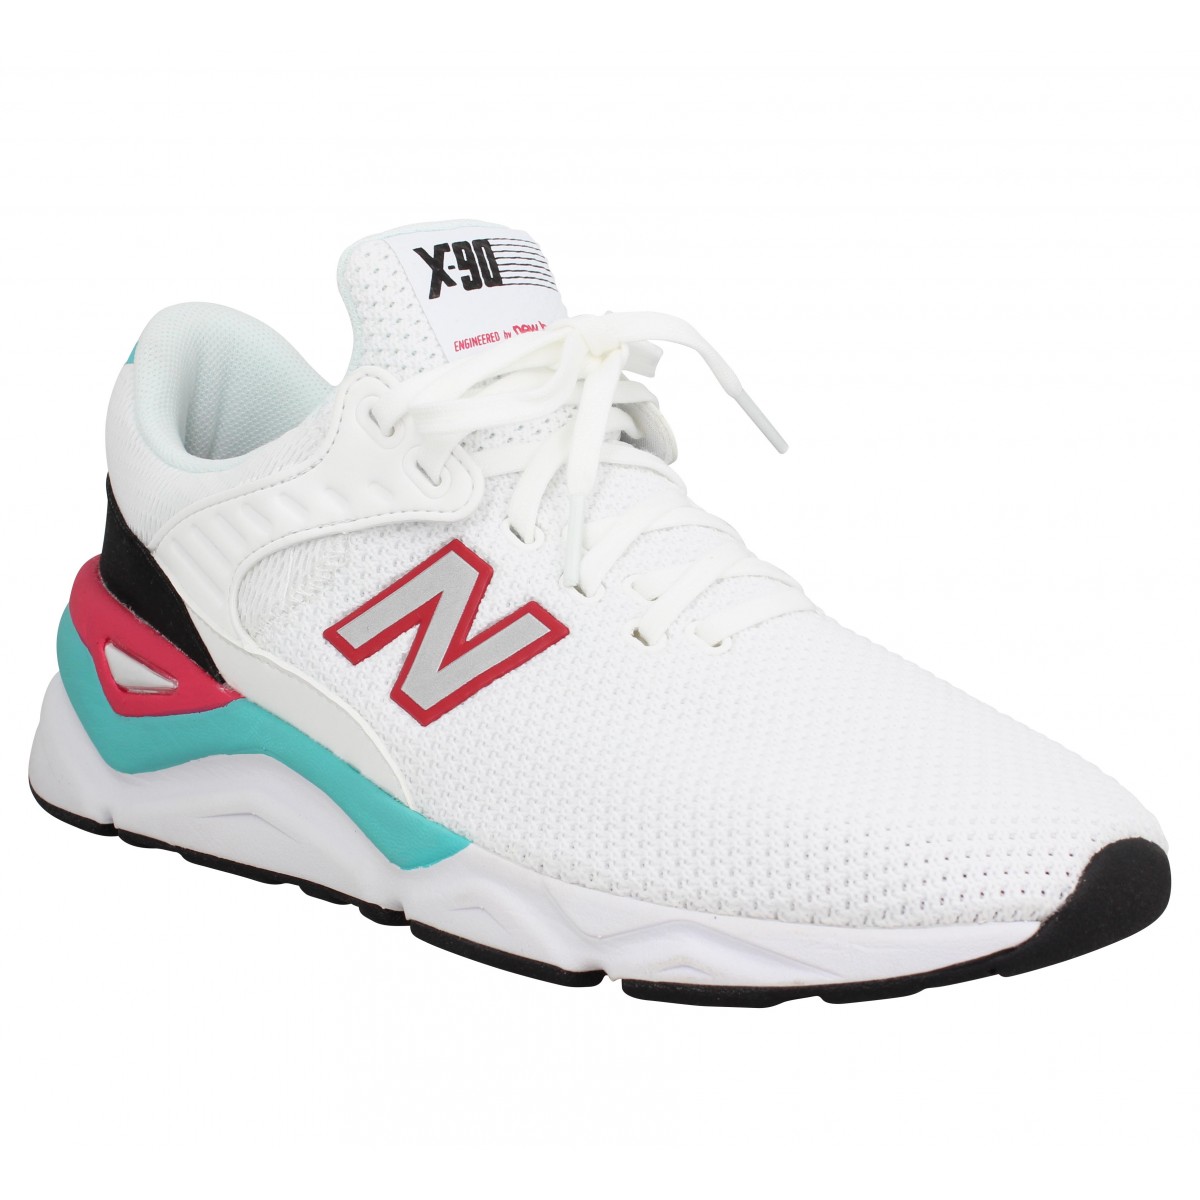 Chaussures New balance x 90 toile homme blanc homme | Fanny chaussures